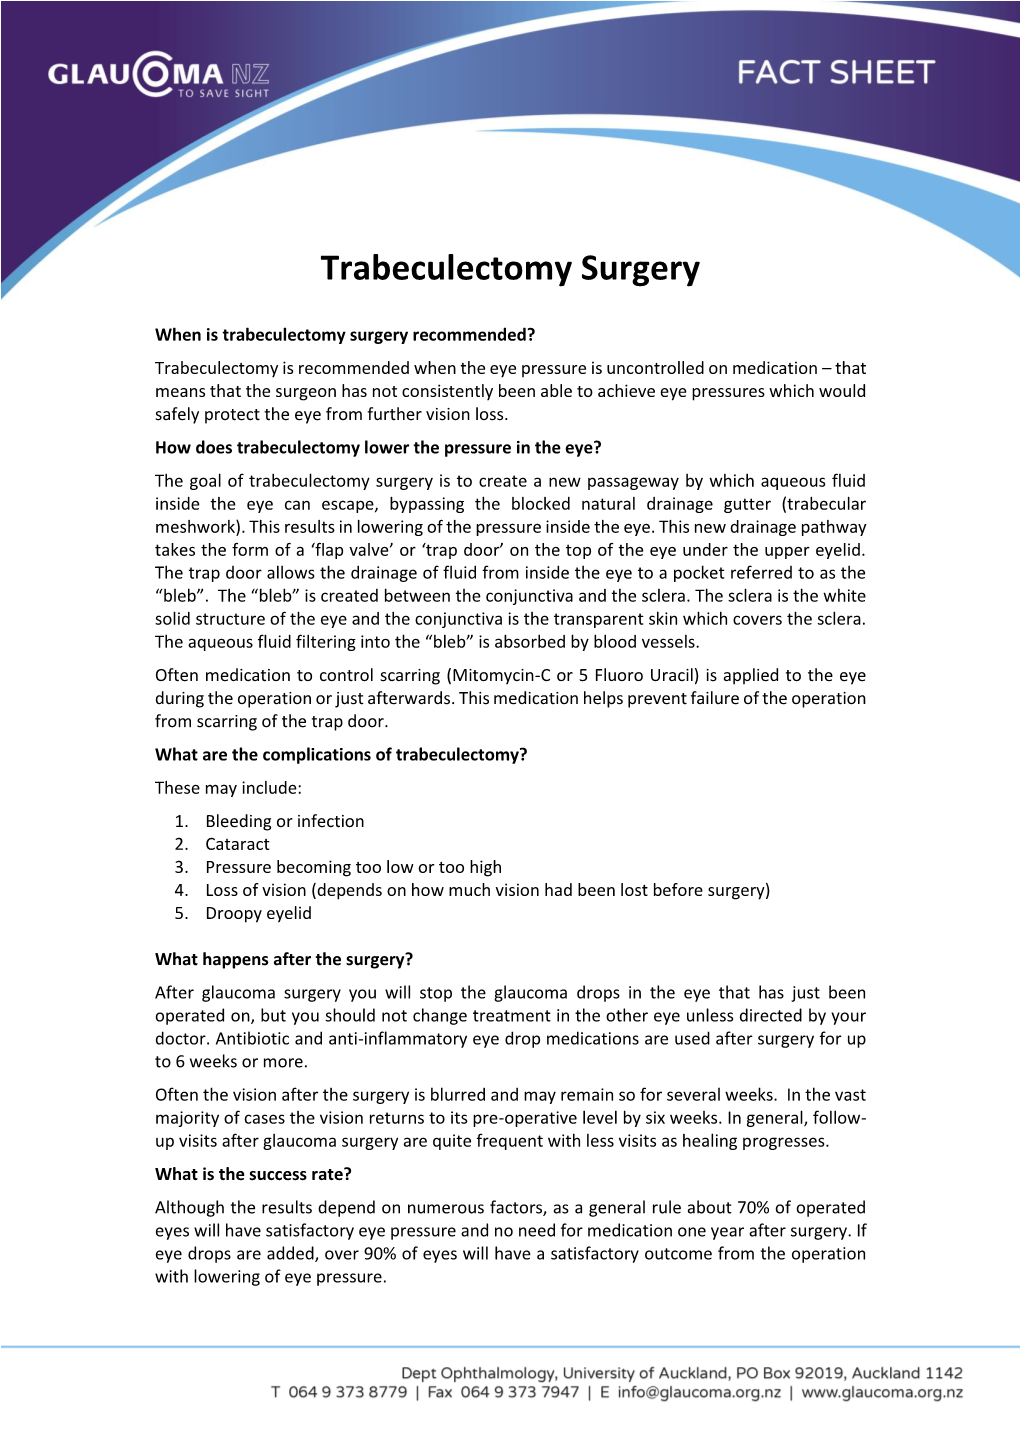 Trabeculectomy Surgery